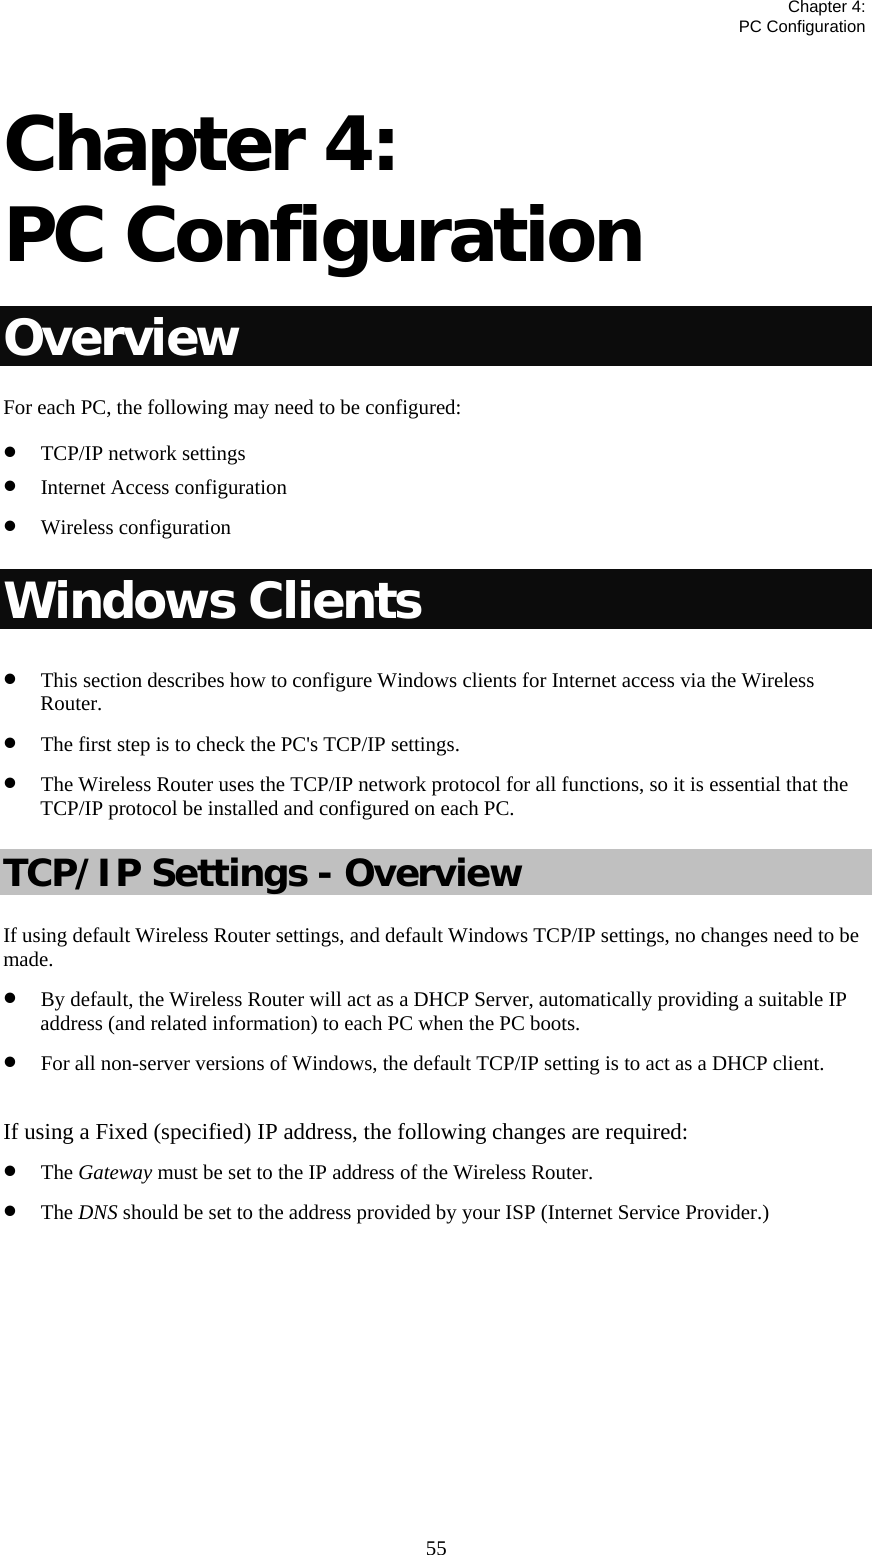   Chapter 4:  PC Configuration  55 Chapter 4:  PC Configuration Overview For each PC, the following may need to be configured: • TCP/IP network settings • Internet Access configuration • Wireless configuration Windows Clients • This section describes how to configure Windows clients for Internet access via the Wireless Router. • The first step is to check the PC&apos;s TCP/IP settings. • The Wireless Router uses the TCP/IP network protocol for all functions, so it is essential that the TCP/IP protocol be installed and configured on each PC. TCP/IP Settings - Overview If using default Wireless Router settings, and default Windows TCP/IP settings, no changes need to be made. • By default, the Wireless Router will act as a DHCP Server, automatically providing a suitable IP address (and related information) to each PC when the PC boots. • For all non-server versions of Windows, the default TCP/IP setting is to act as a DHCP client.  If using a Fixed (specified) IP address, the following changes are required: • The Gateway must be set to the IP address of the Wireless Router. • The DNS should be set to the address provided by your ISP (Internet Service Provider.)        